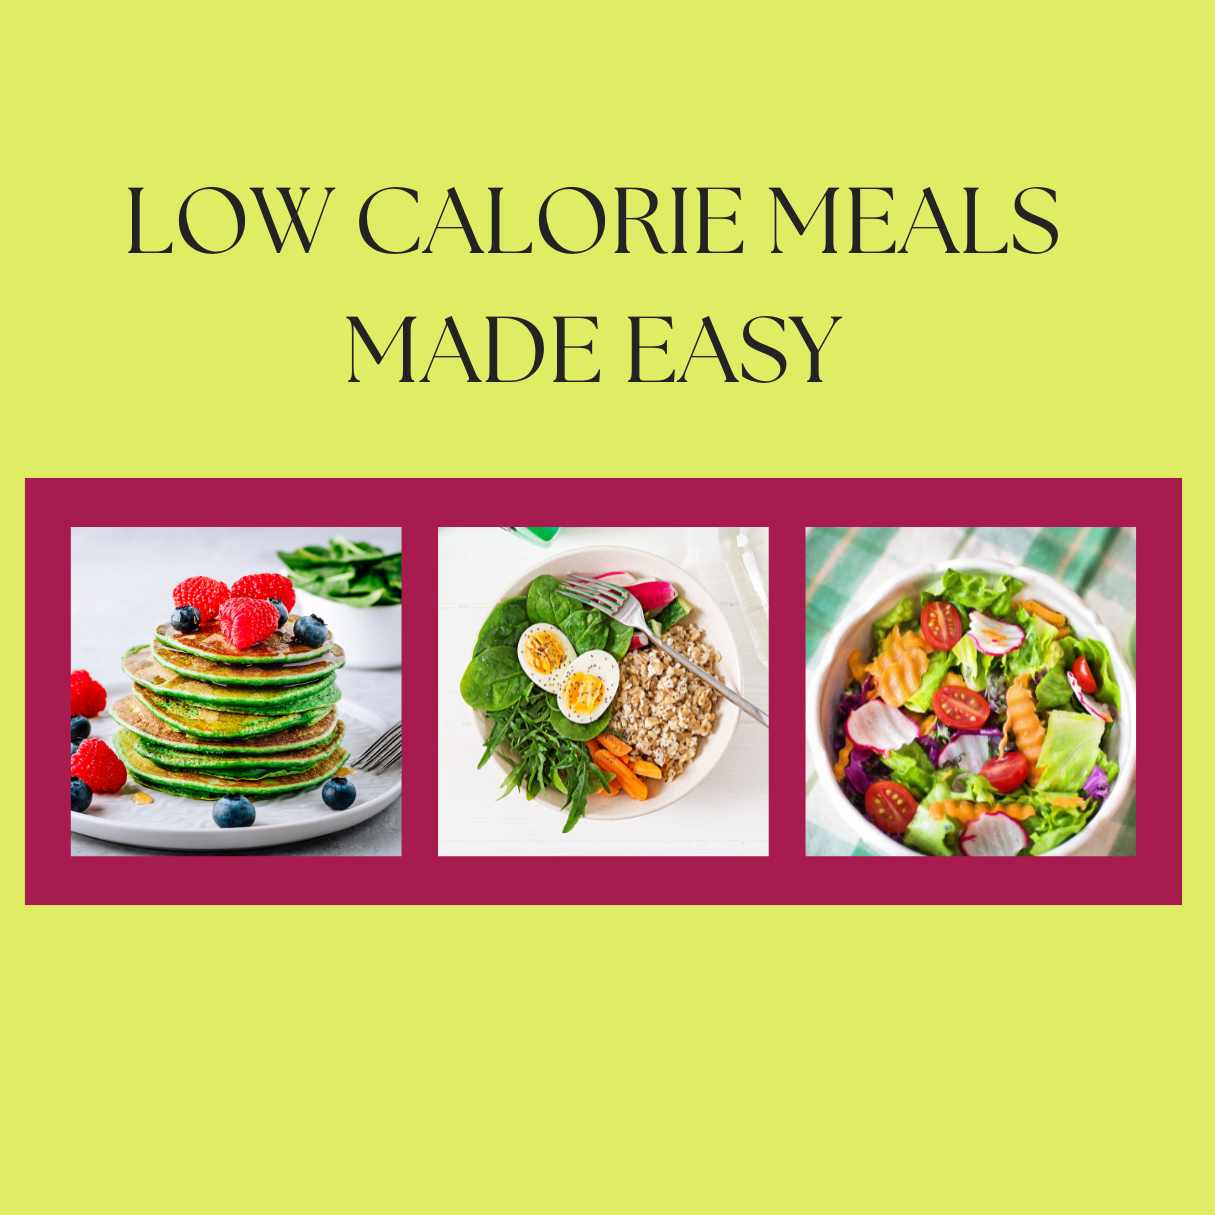 Low Calorie Meals Made Easy Slim Down with Delicious Foods_tipsforfits.com